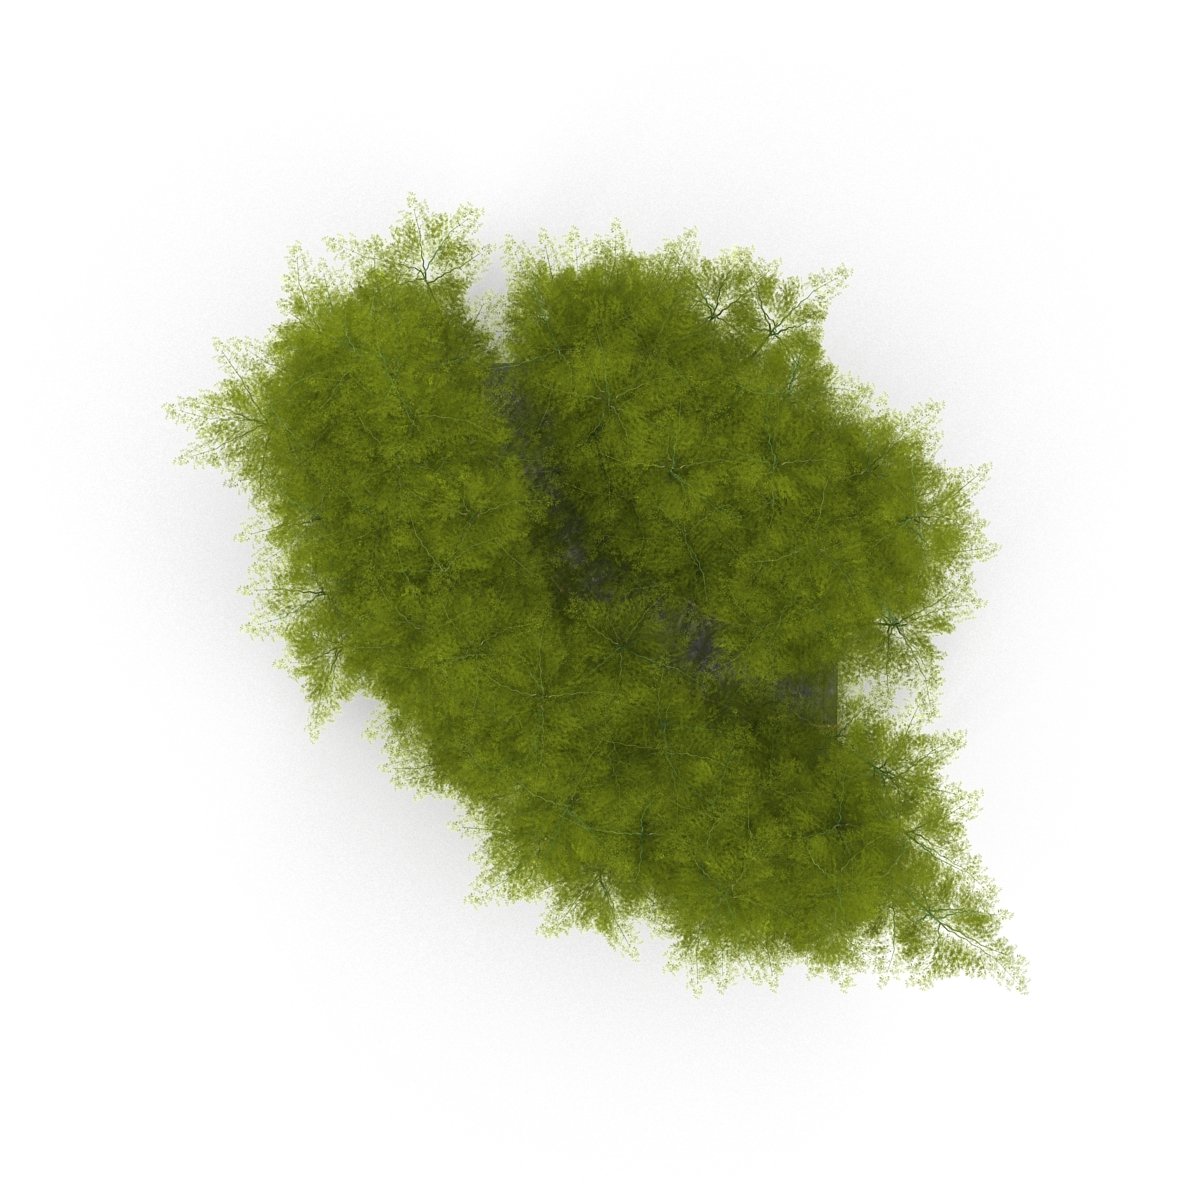 Bunch of green grass on a white background.